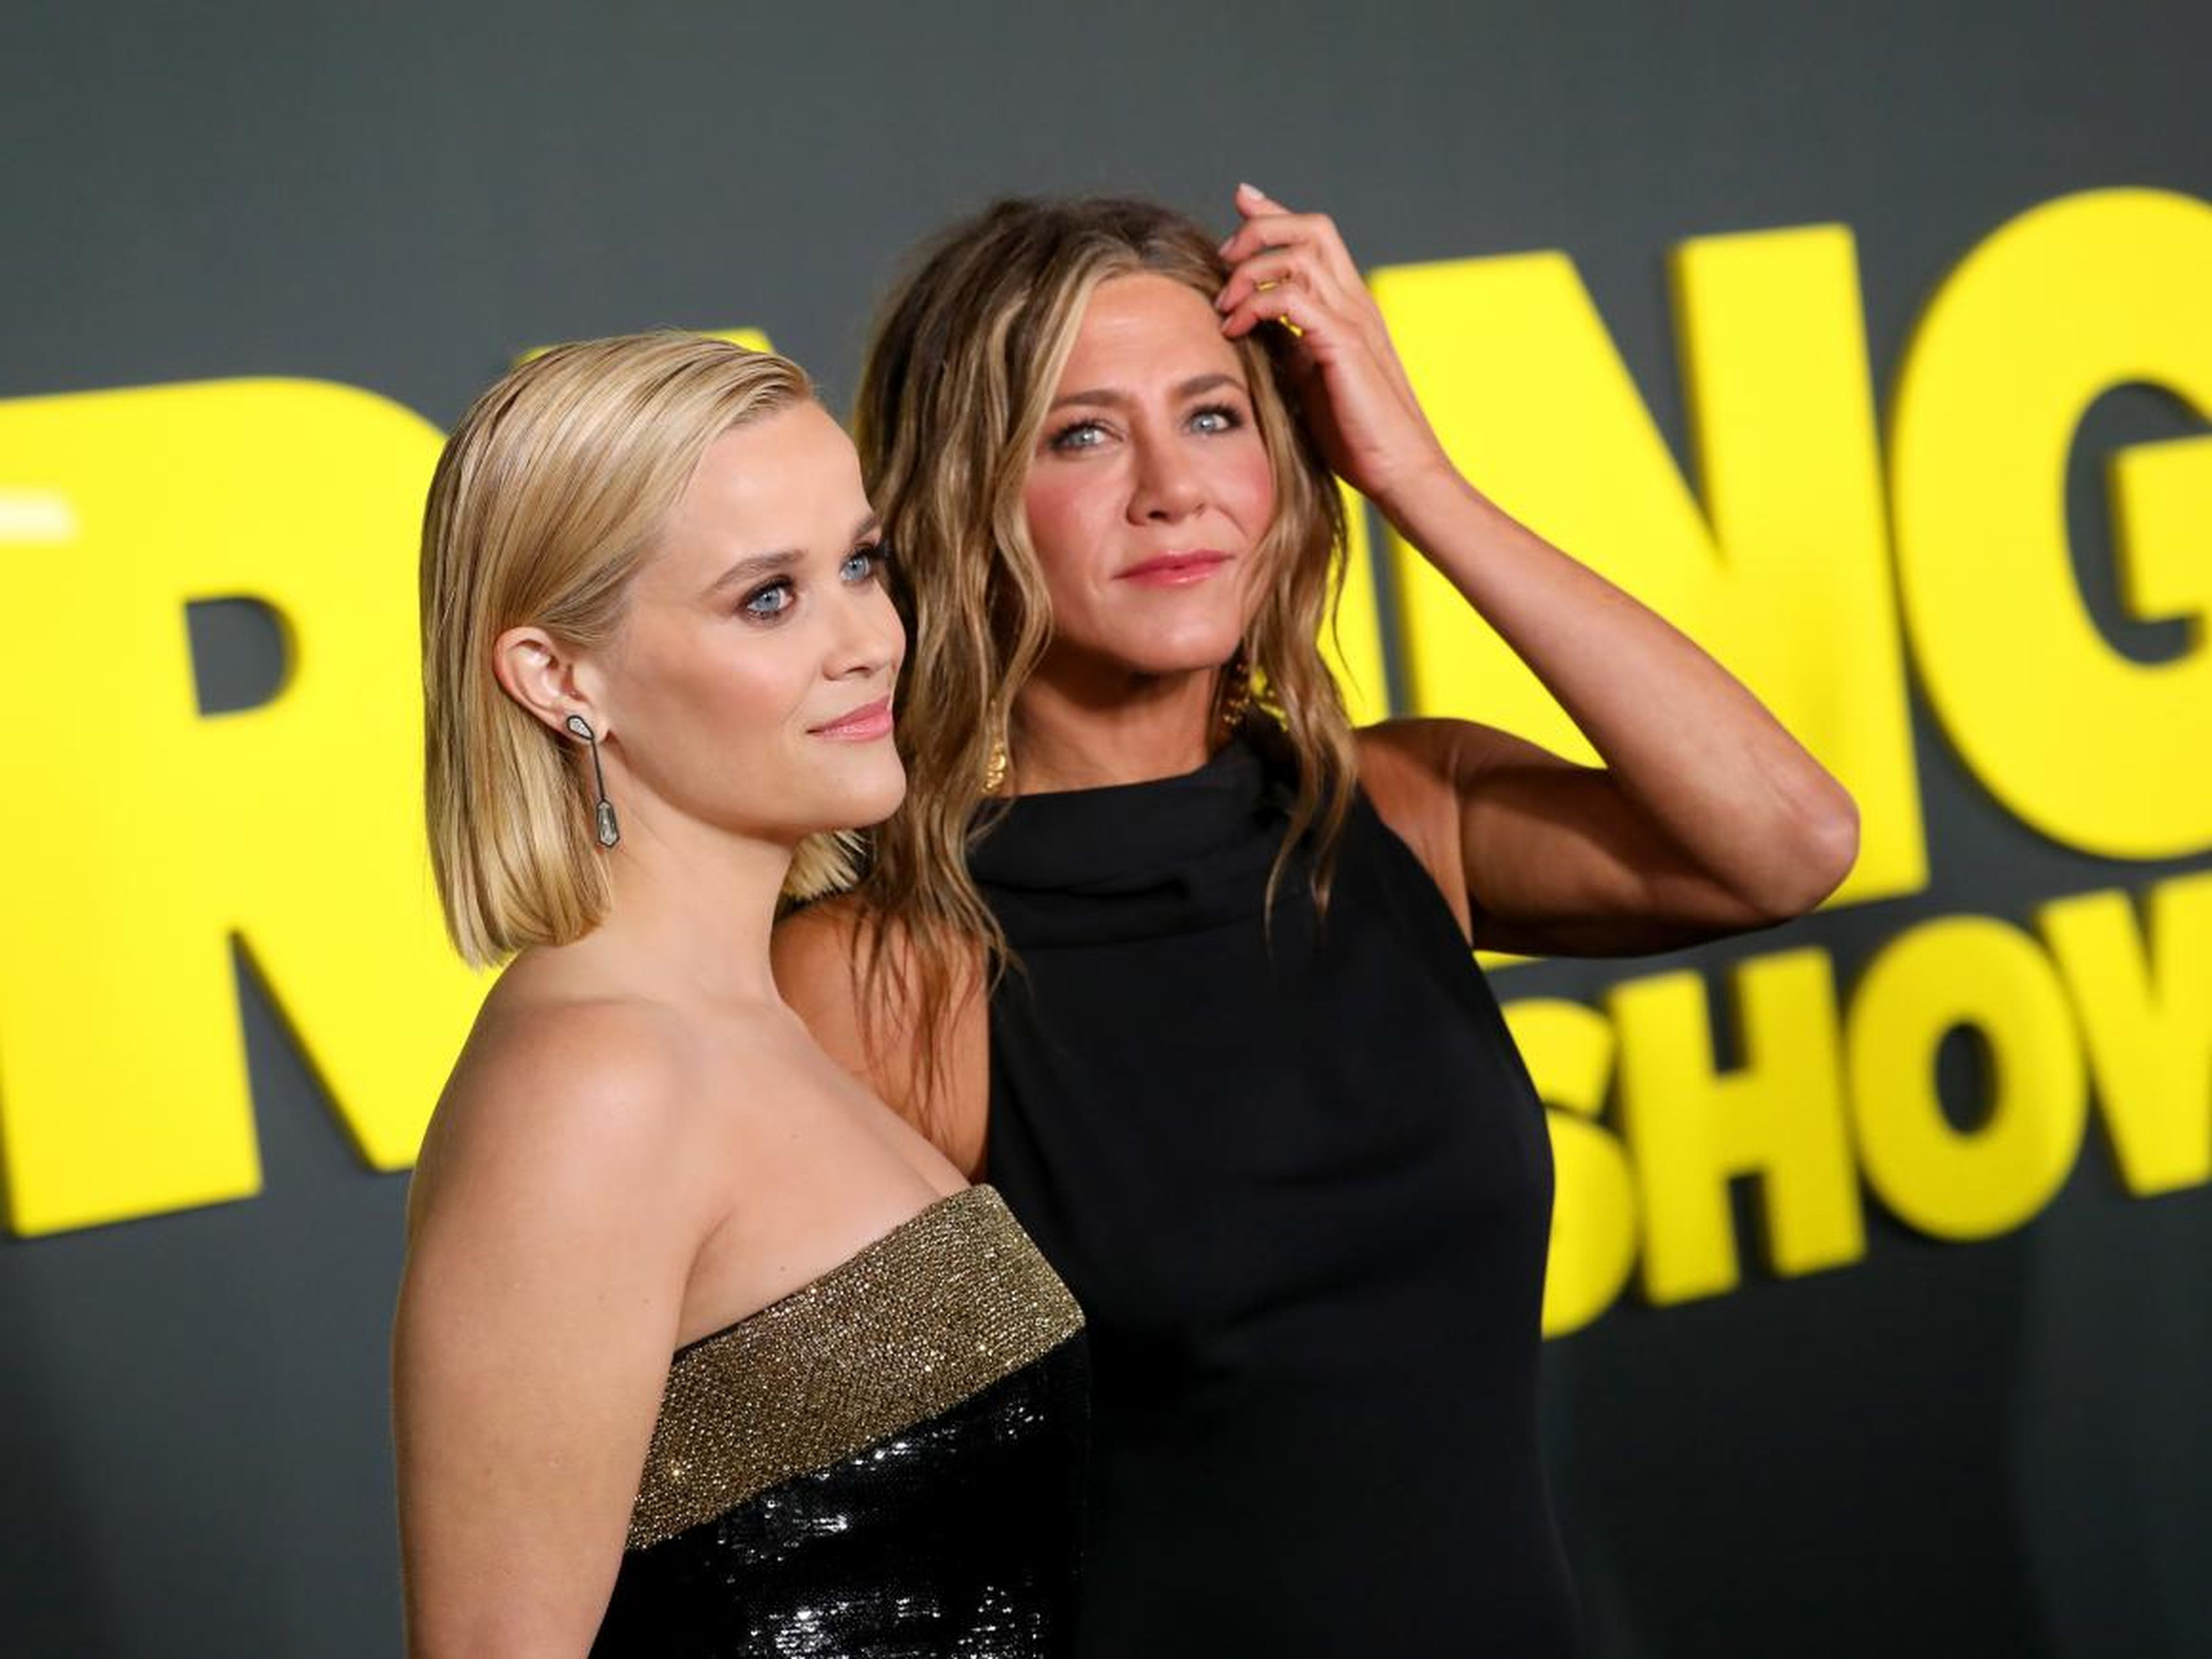 The show, whose cast also includes Reese Witherspoon and Steve Carell, debuted November 1.